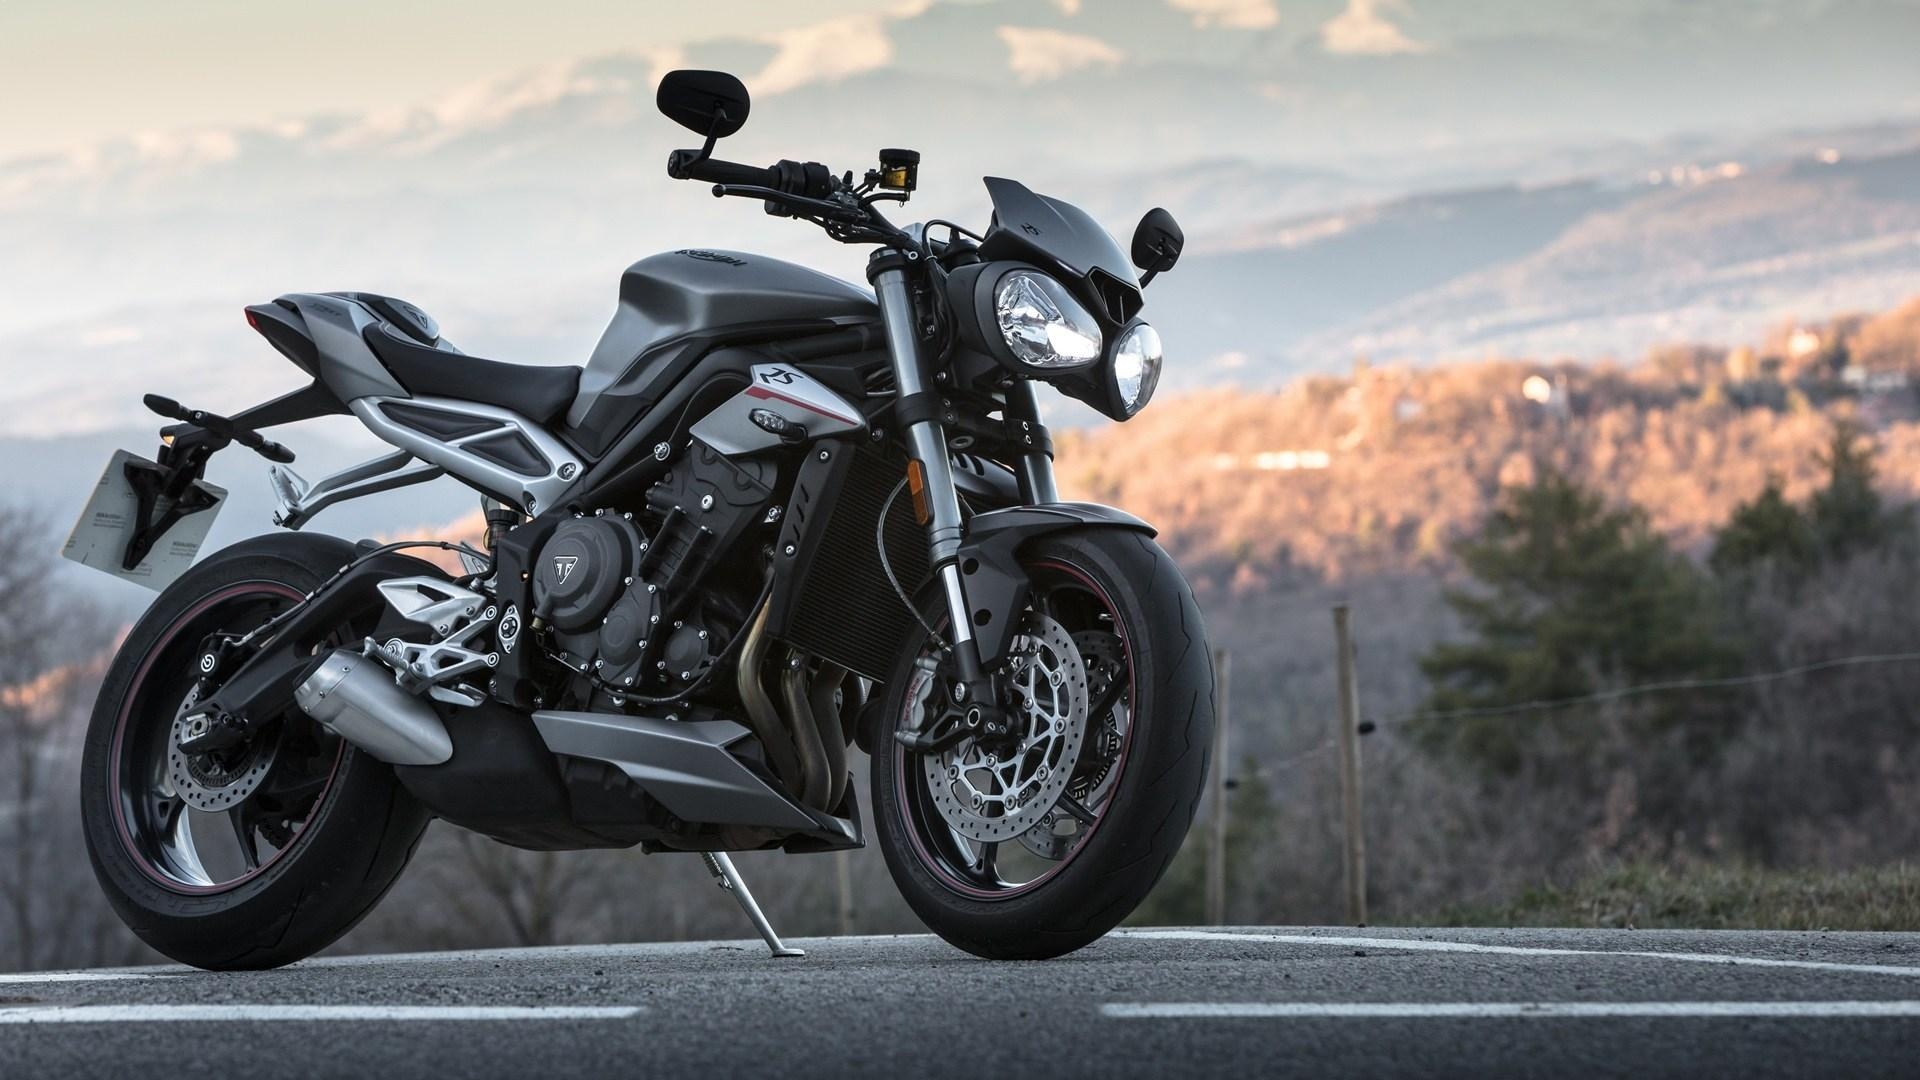 Triumph Street Triple RS, Pickootech review, Auto enthusiasts, Bike features, 1920x1080 Full HD Desktop